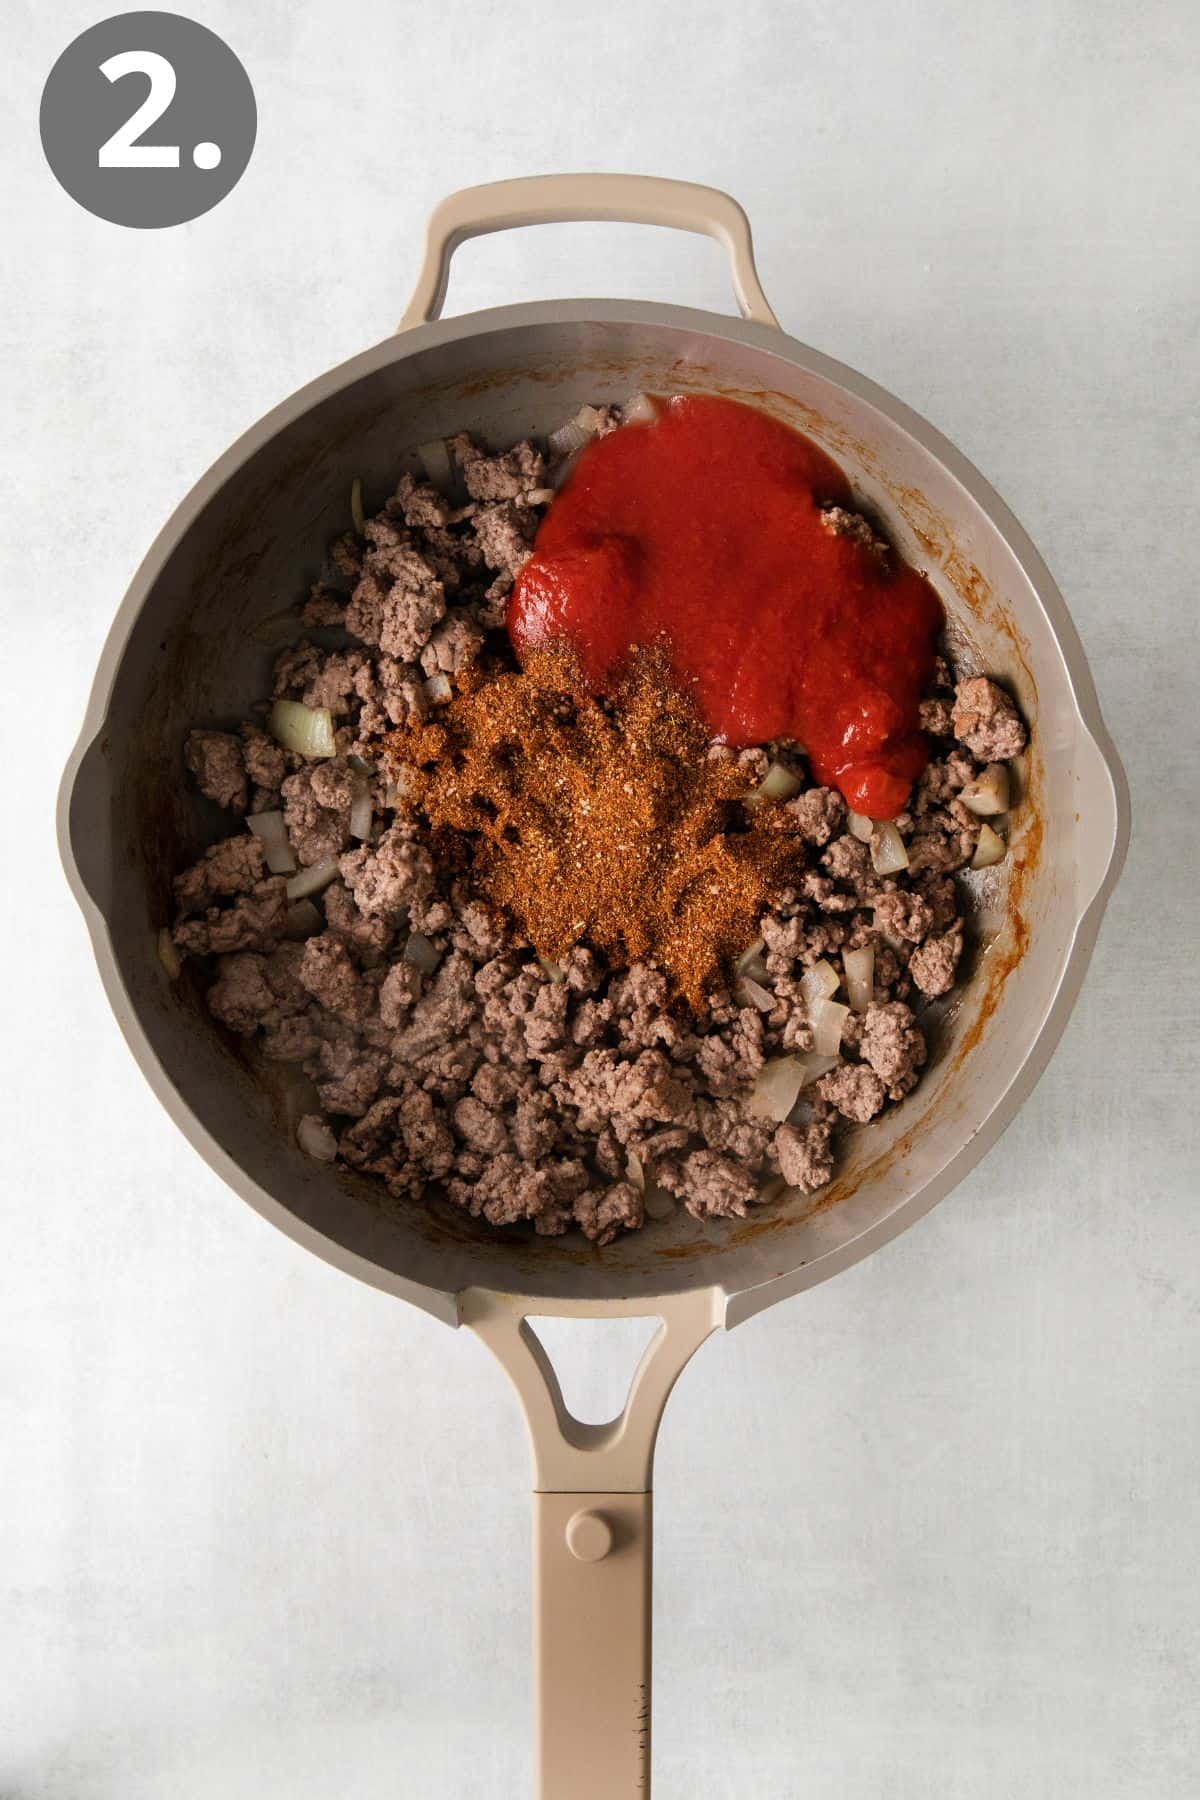 Ground beef and seasoning in a skillet